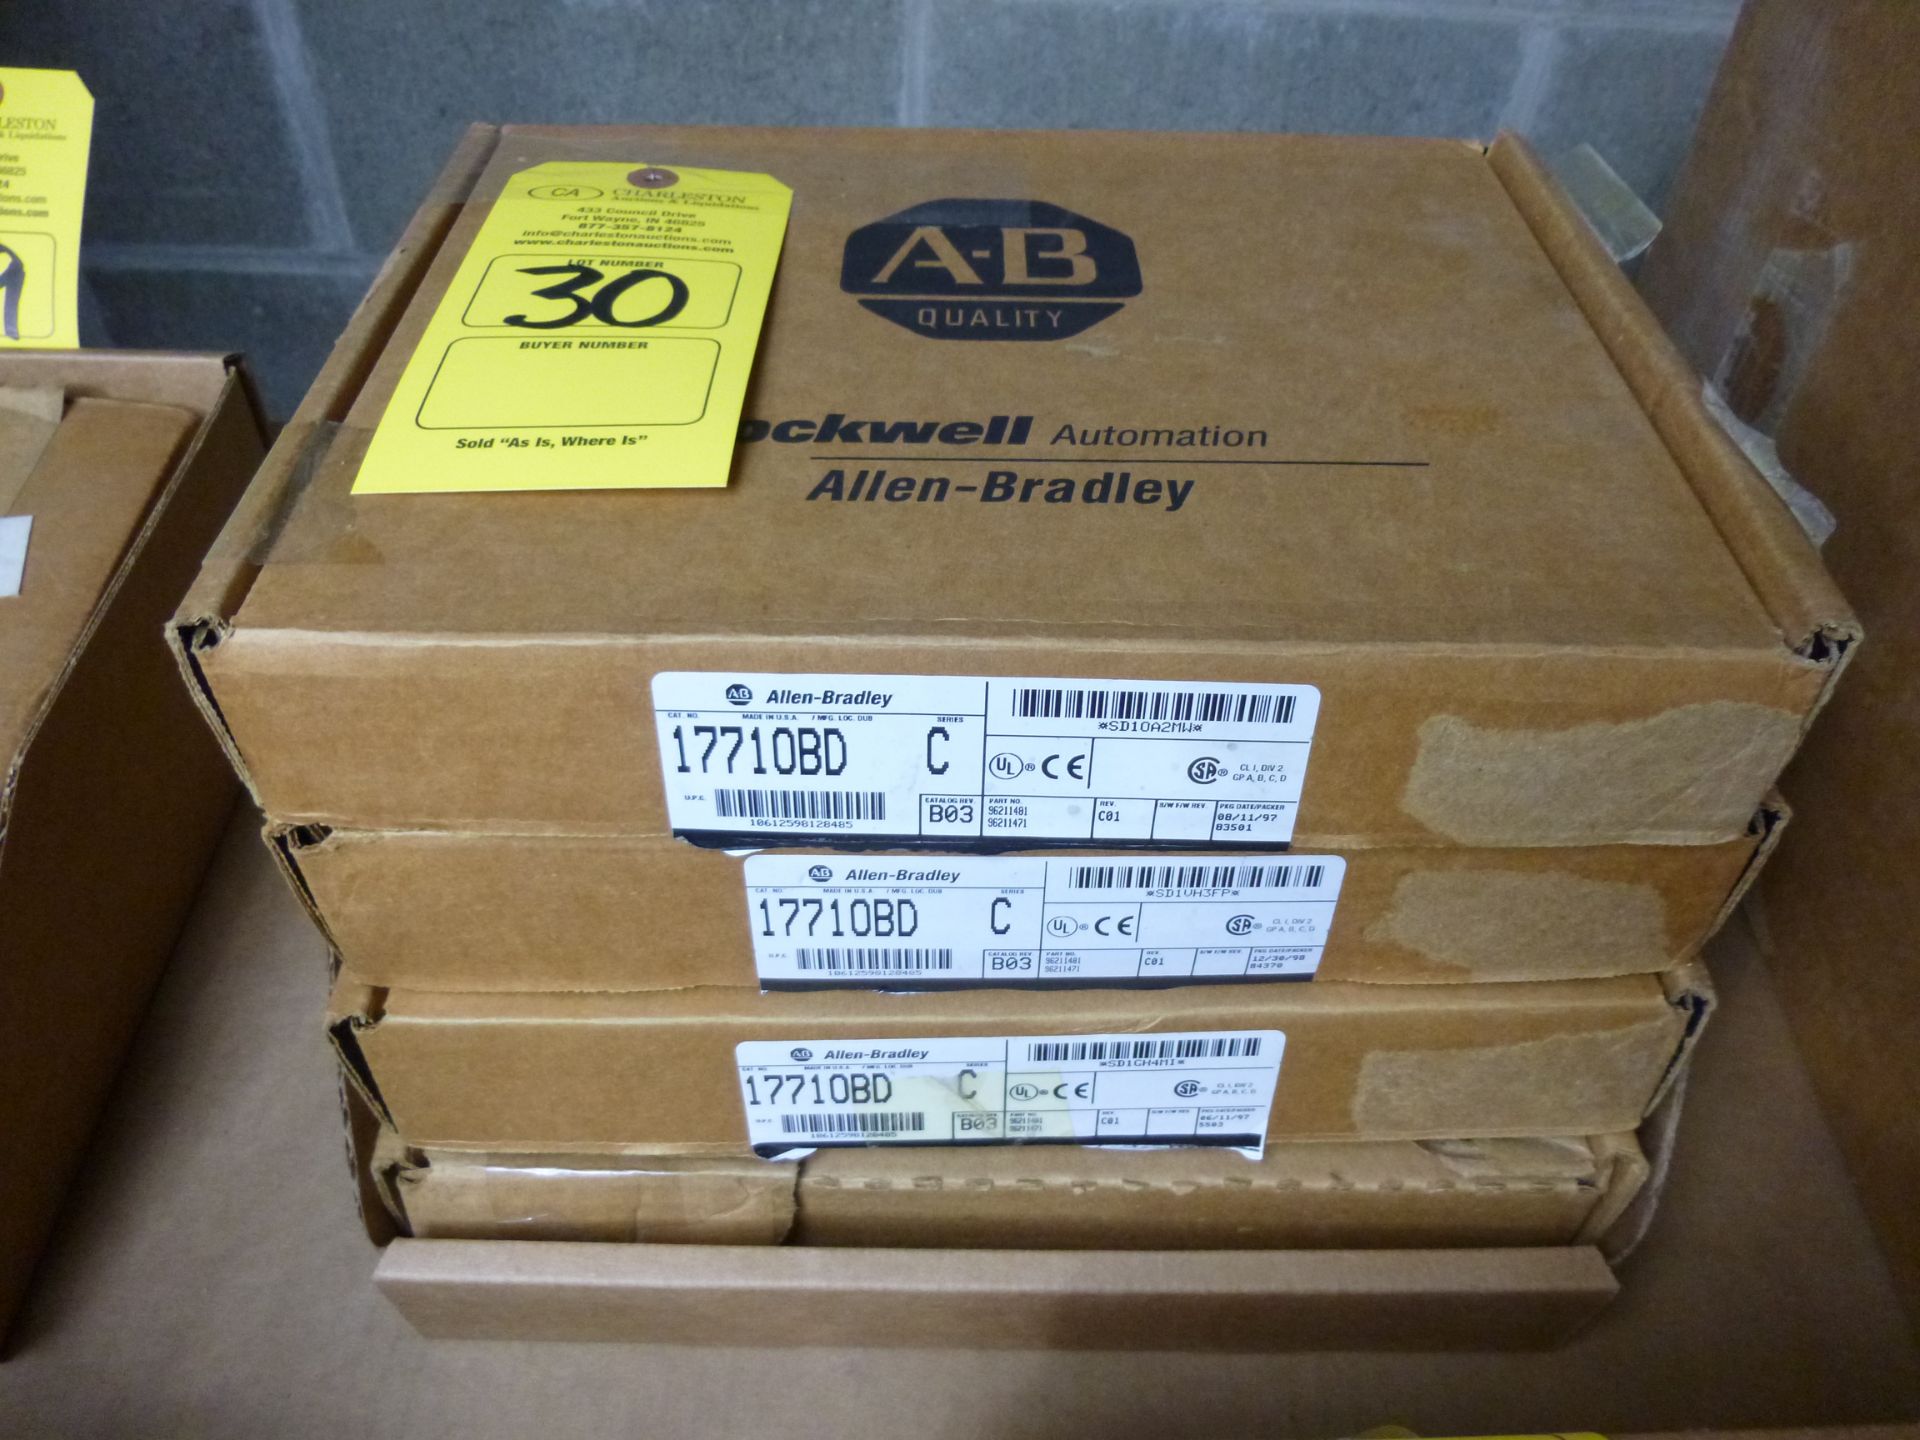 (Qty 4) Allen Bradley 1771-OBD/C Rev B03 (new in box) Shipping can be prepared for either ground